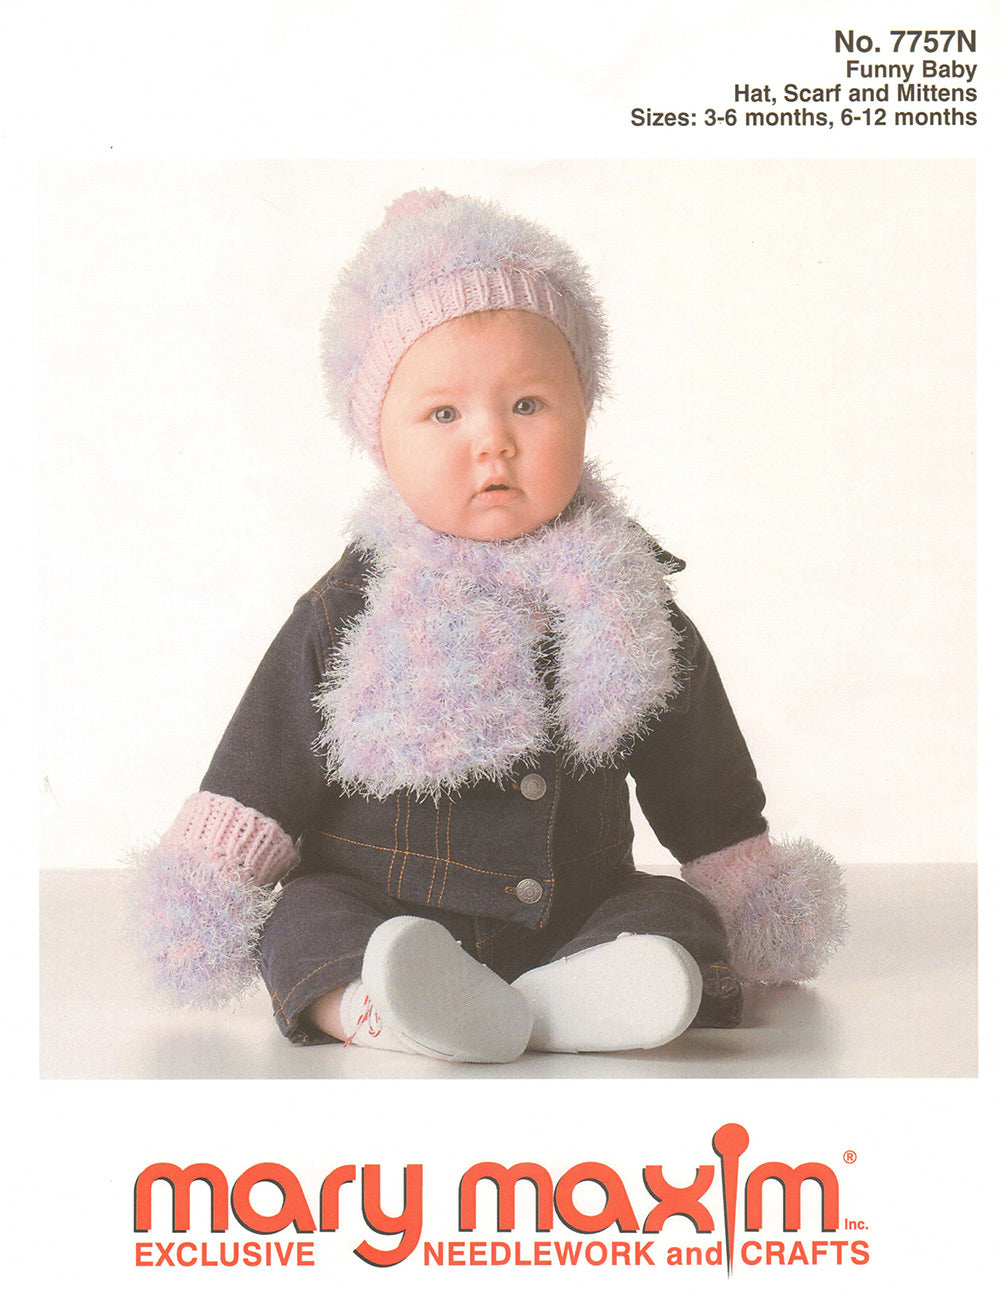 Funny Baby Hat, Scarf and Mittens Pattern